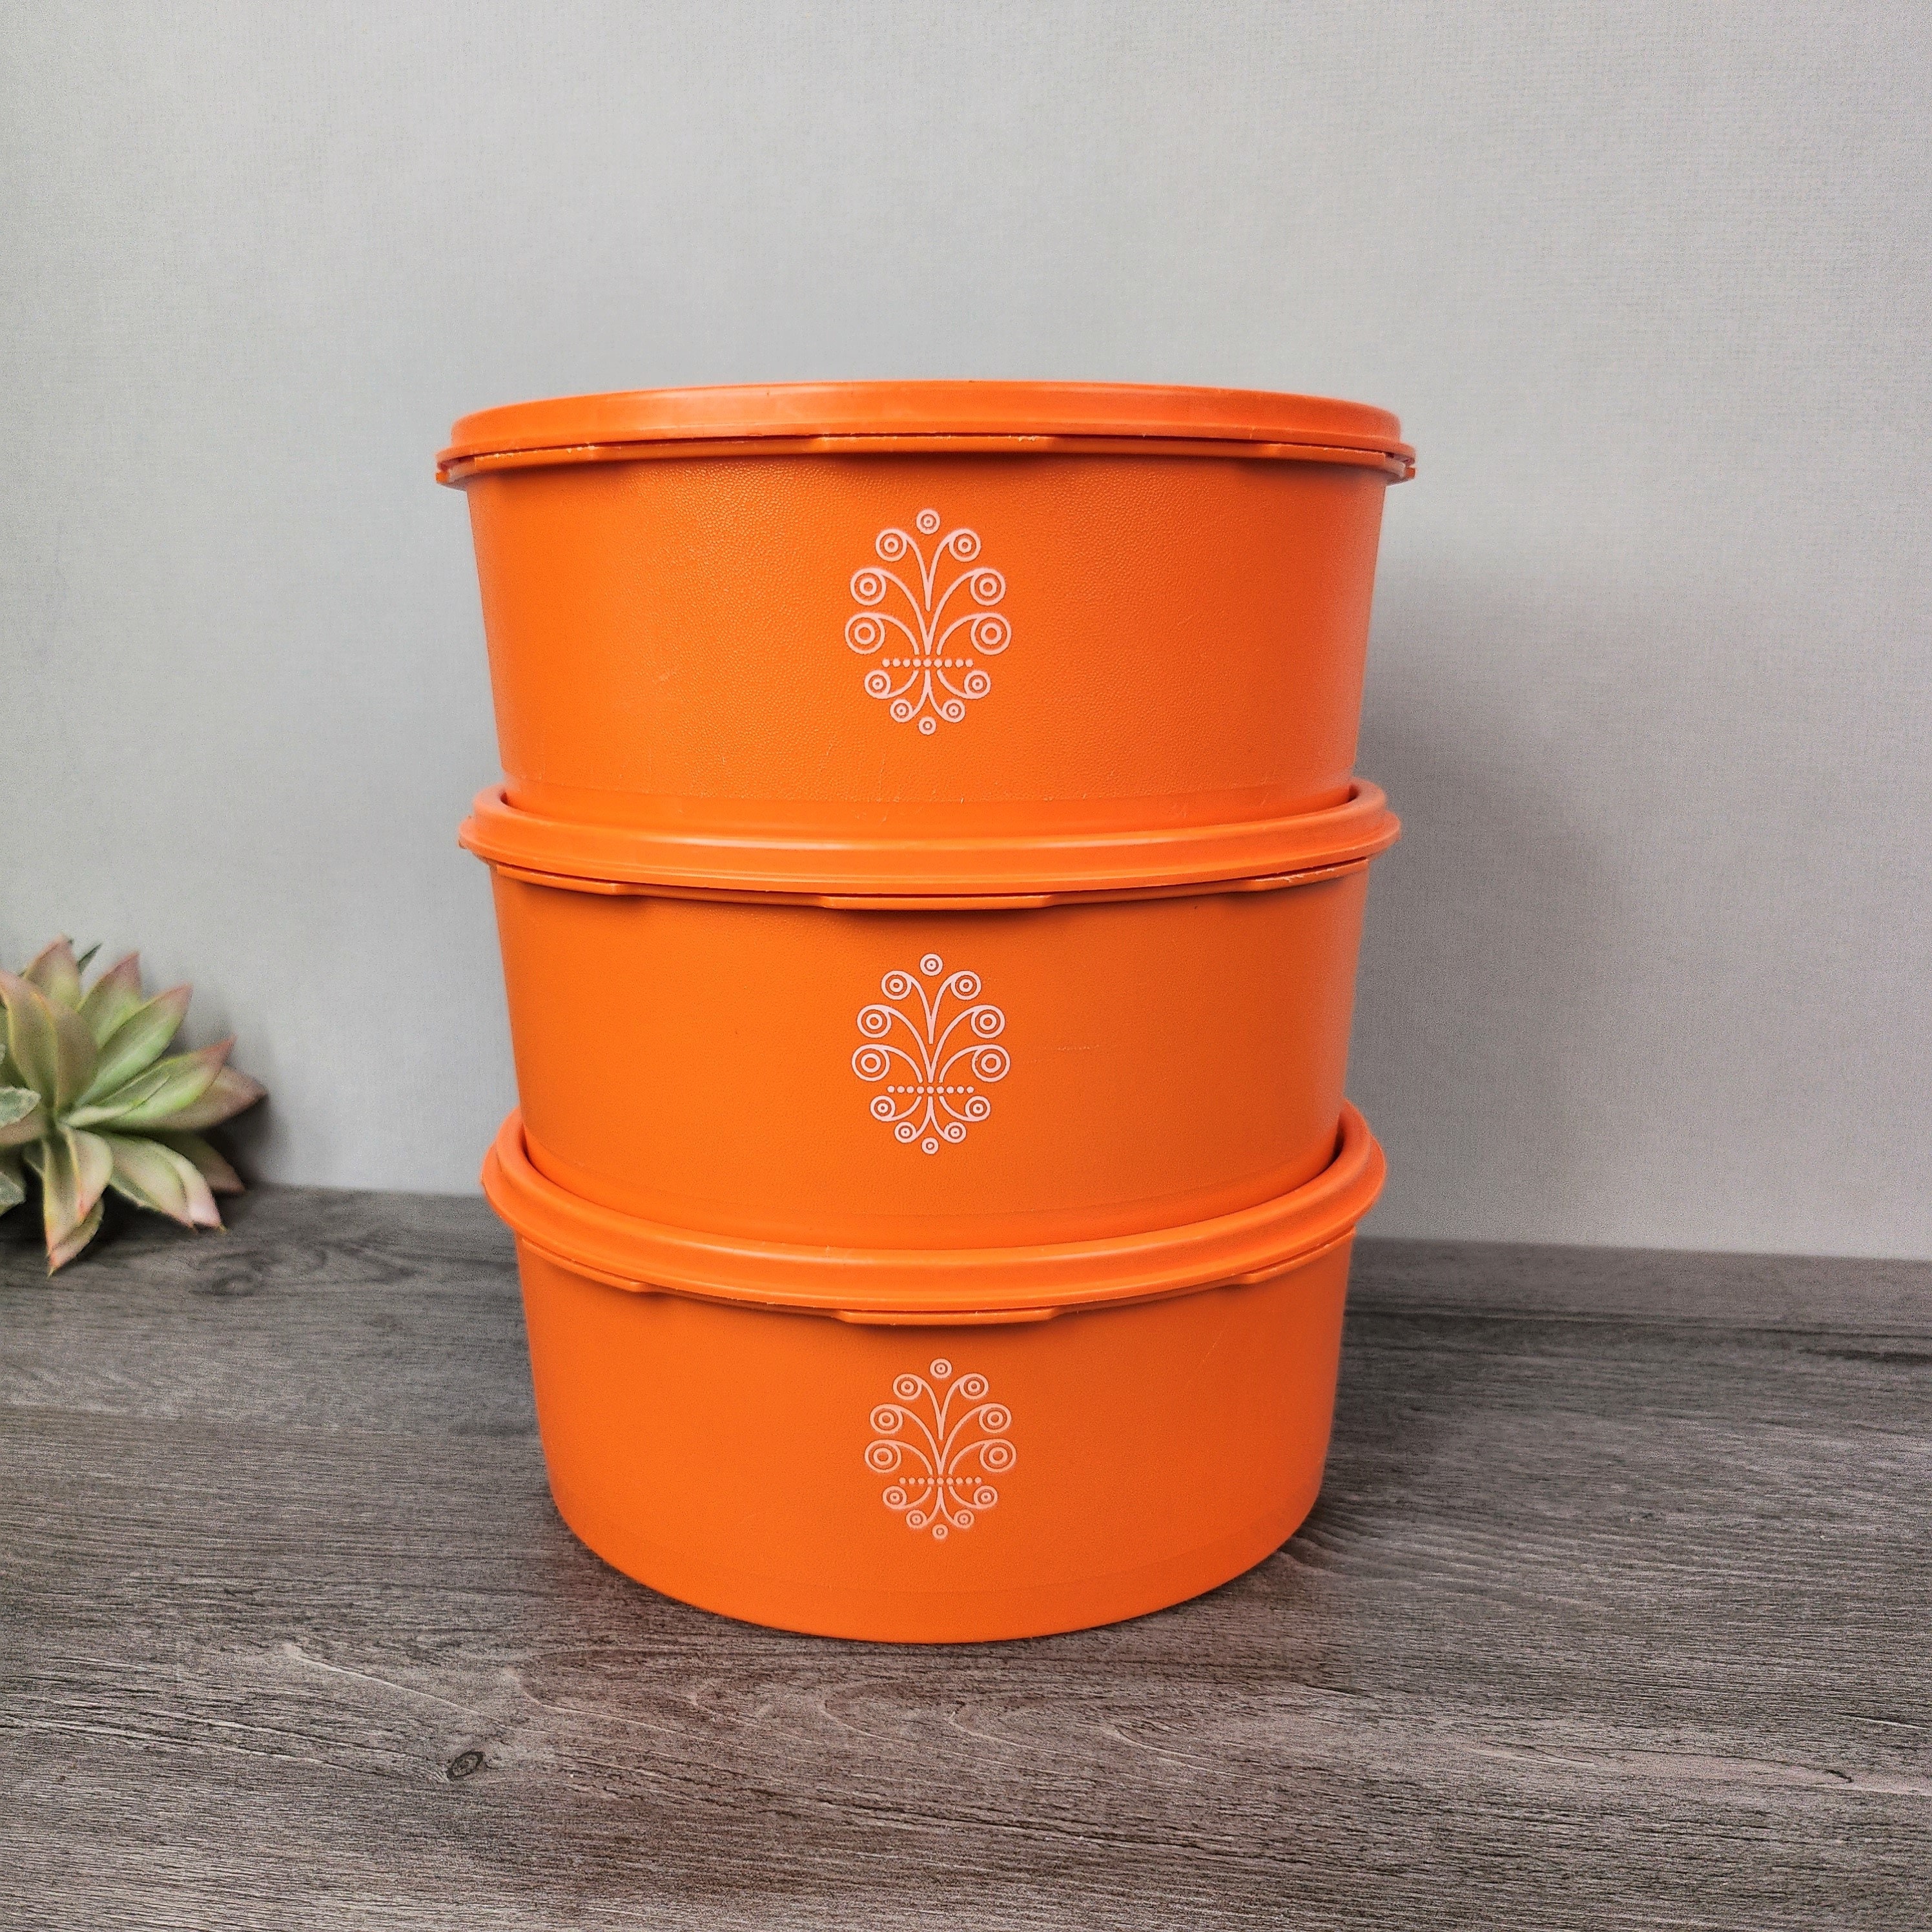 Tupperware USA Orange Servalier 3 Set Kitchen Canisters Containers